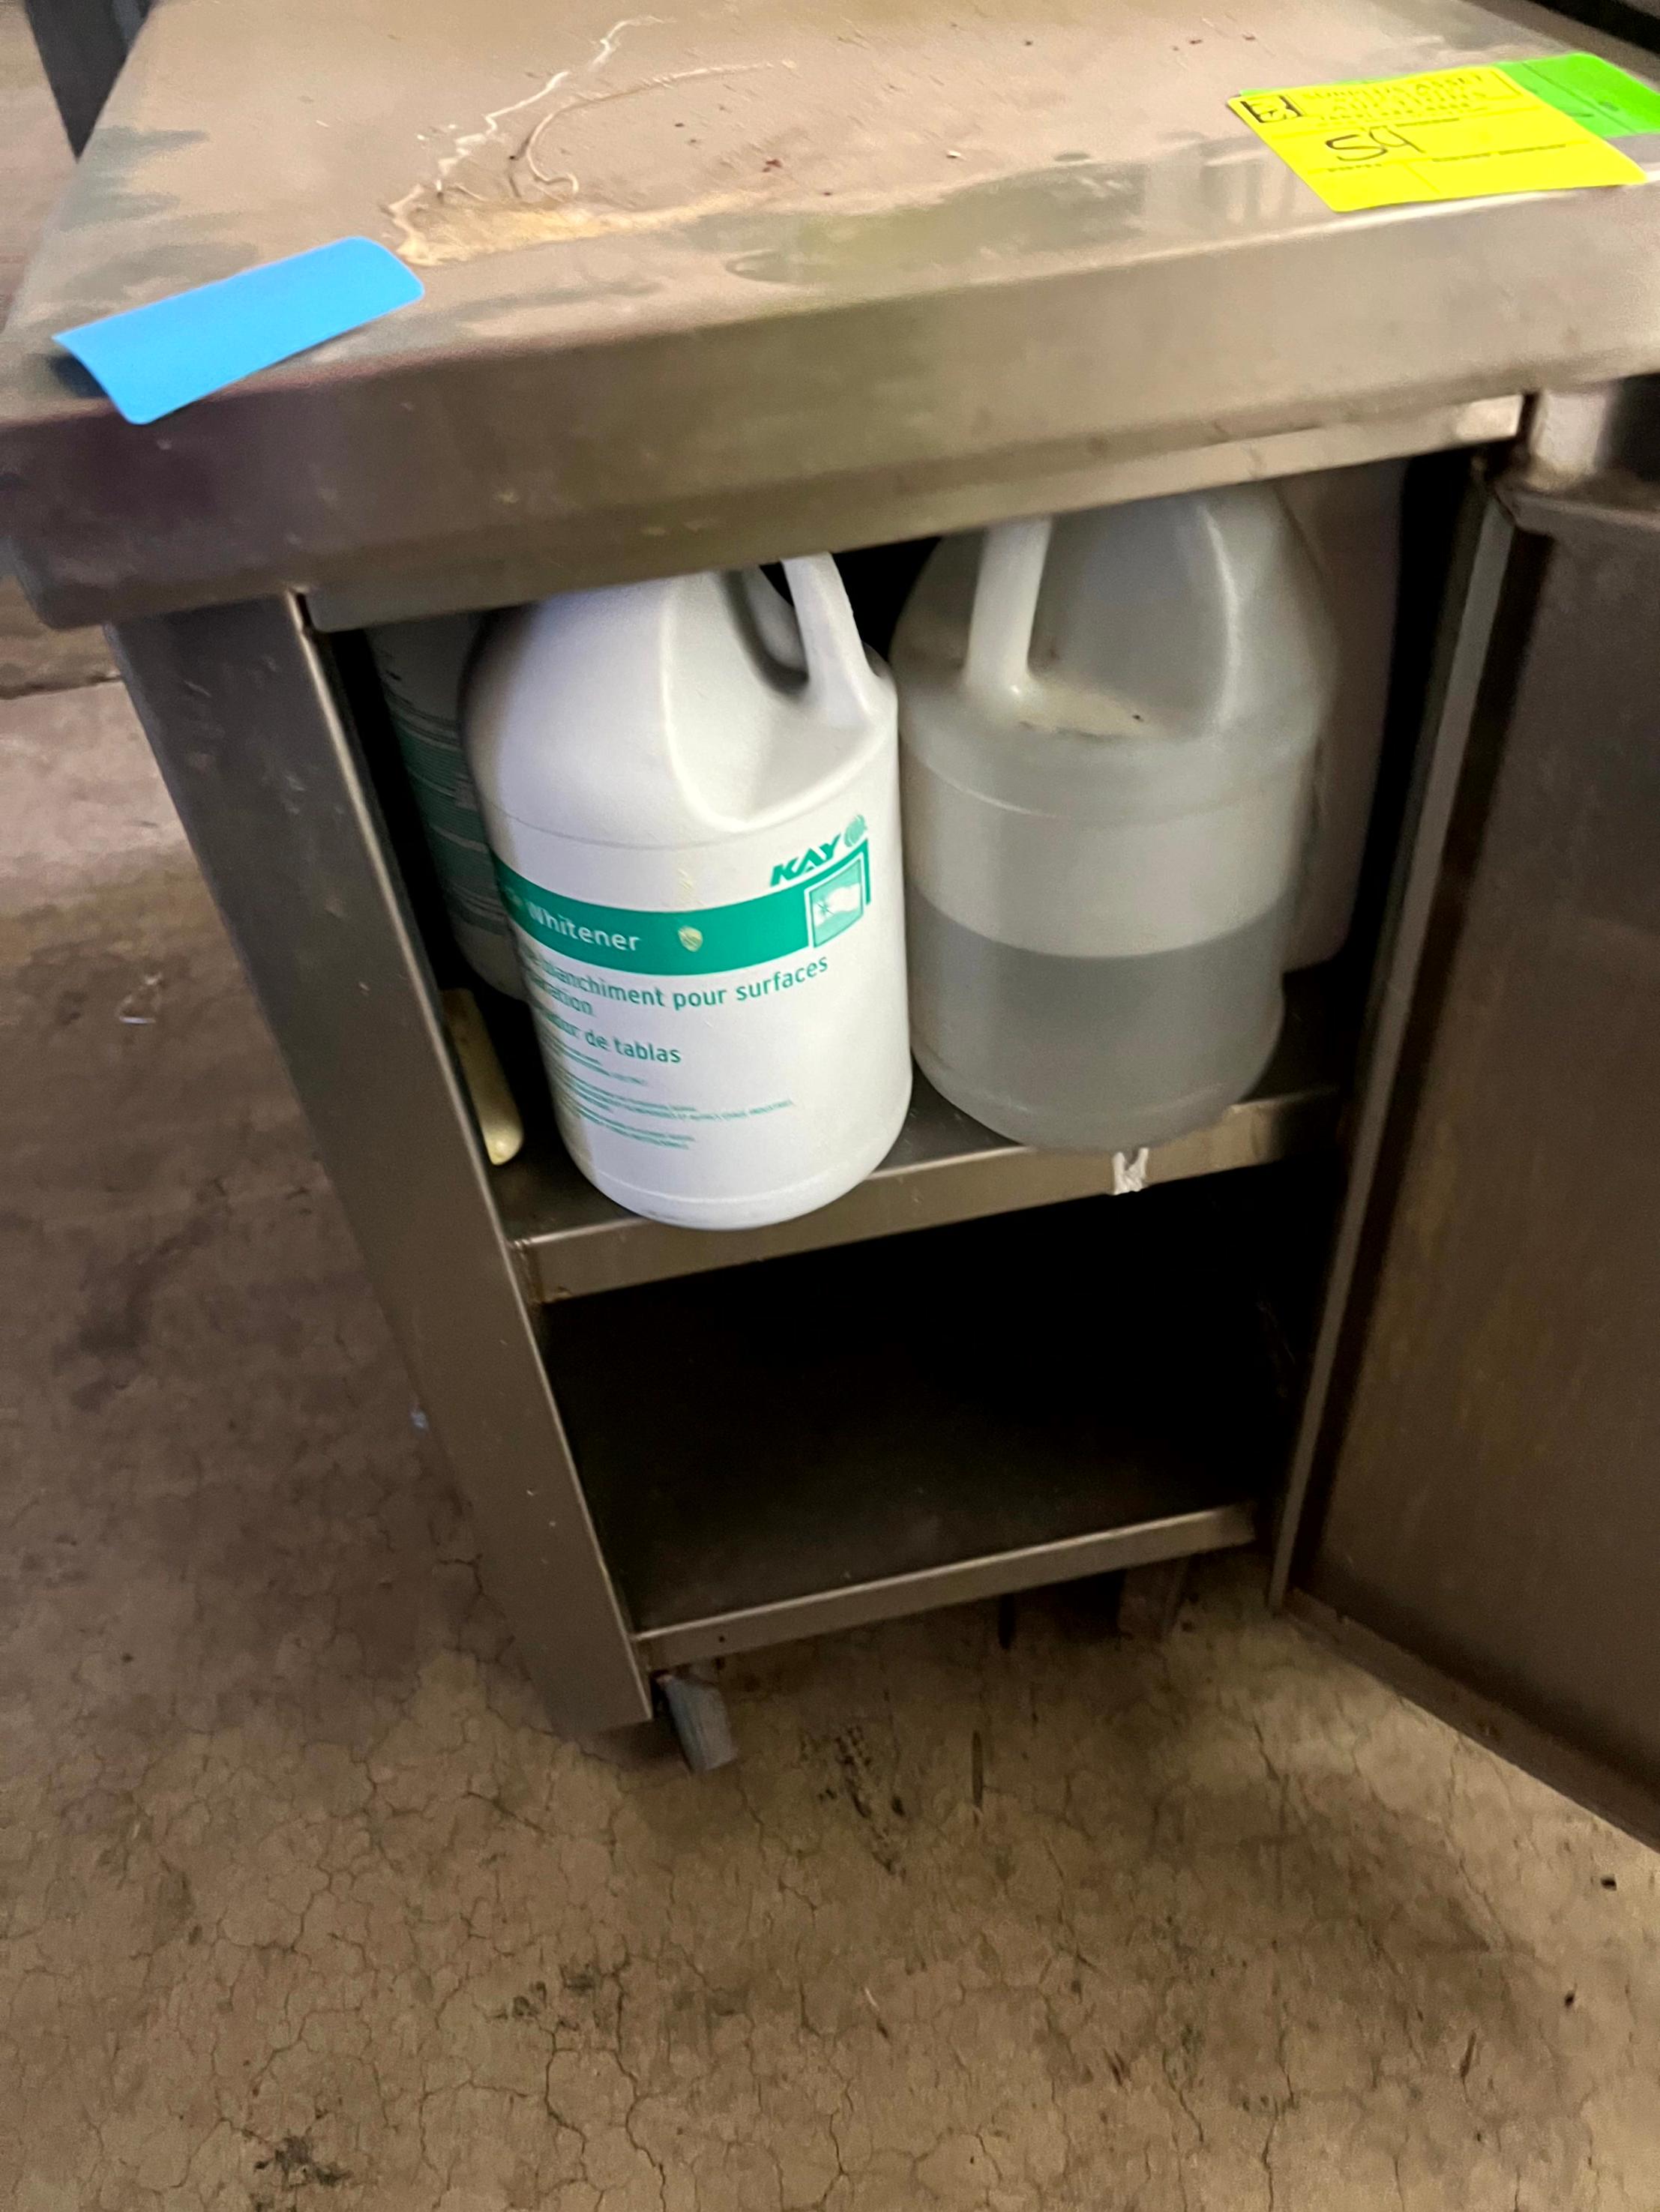 Small Stainless Cabinet